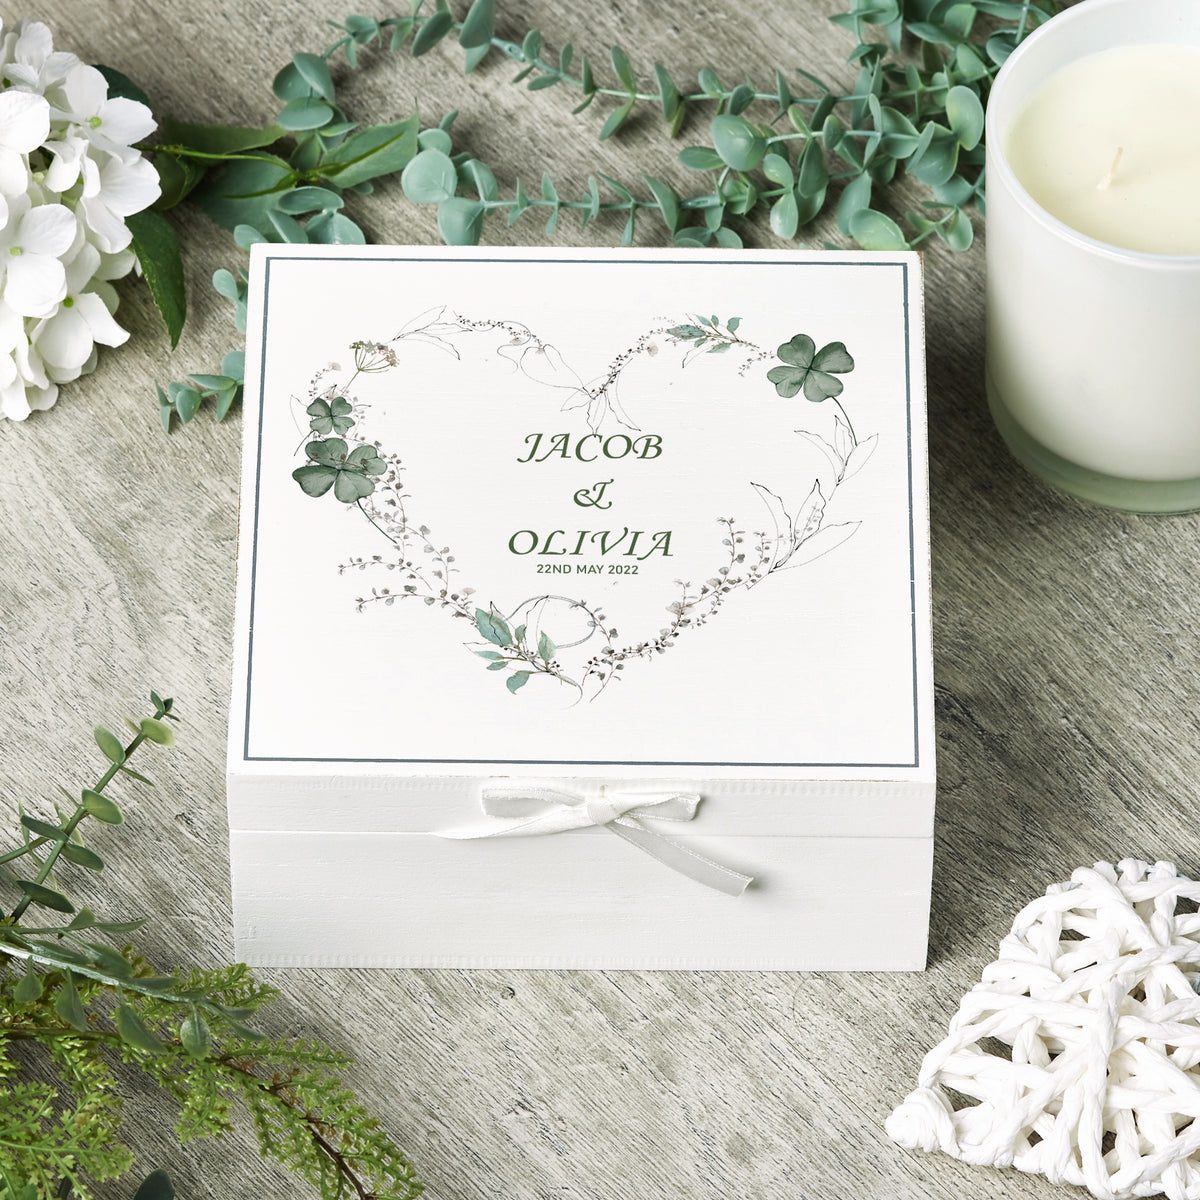 Personalised Wedding Day Vintage Wooden Keepsake Box Gift With Green Clover Heart Print